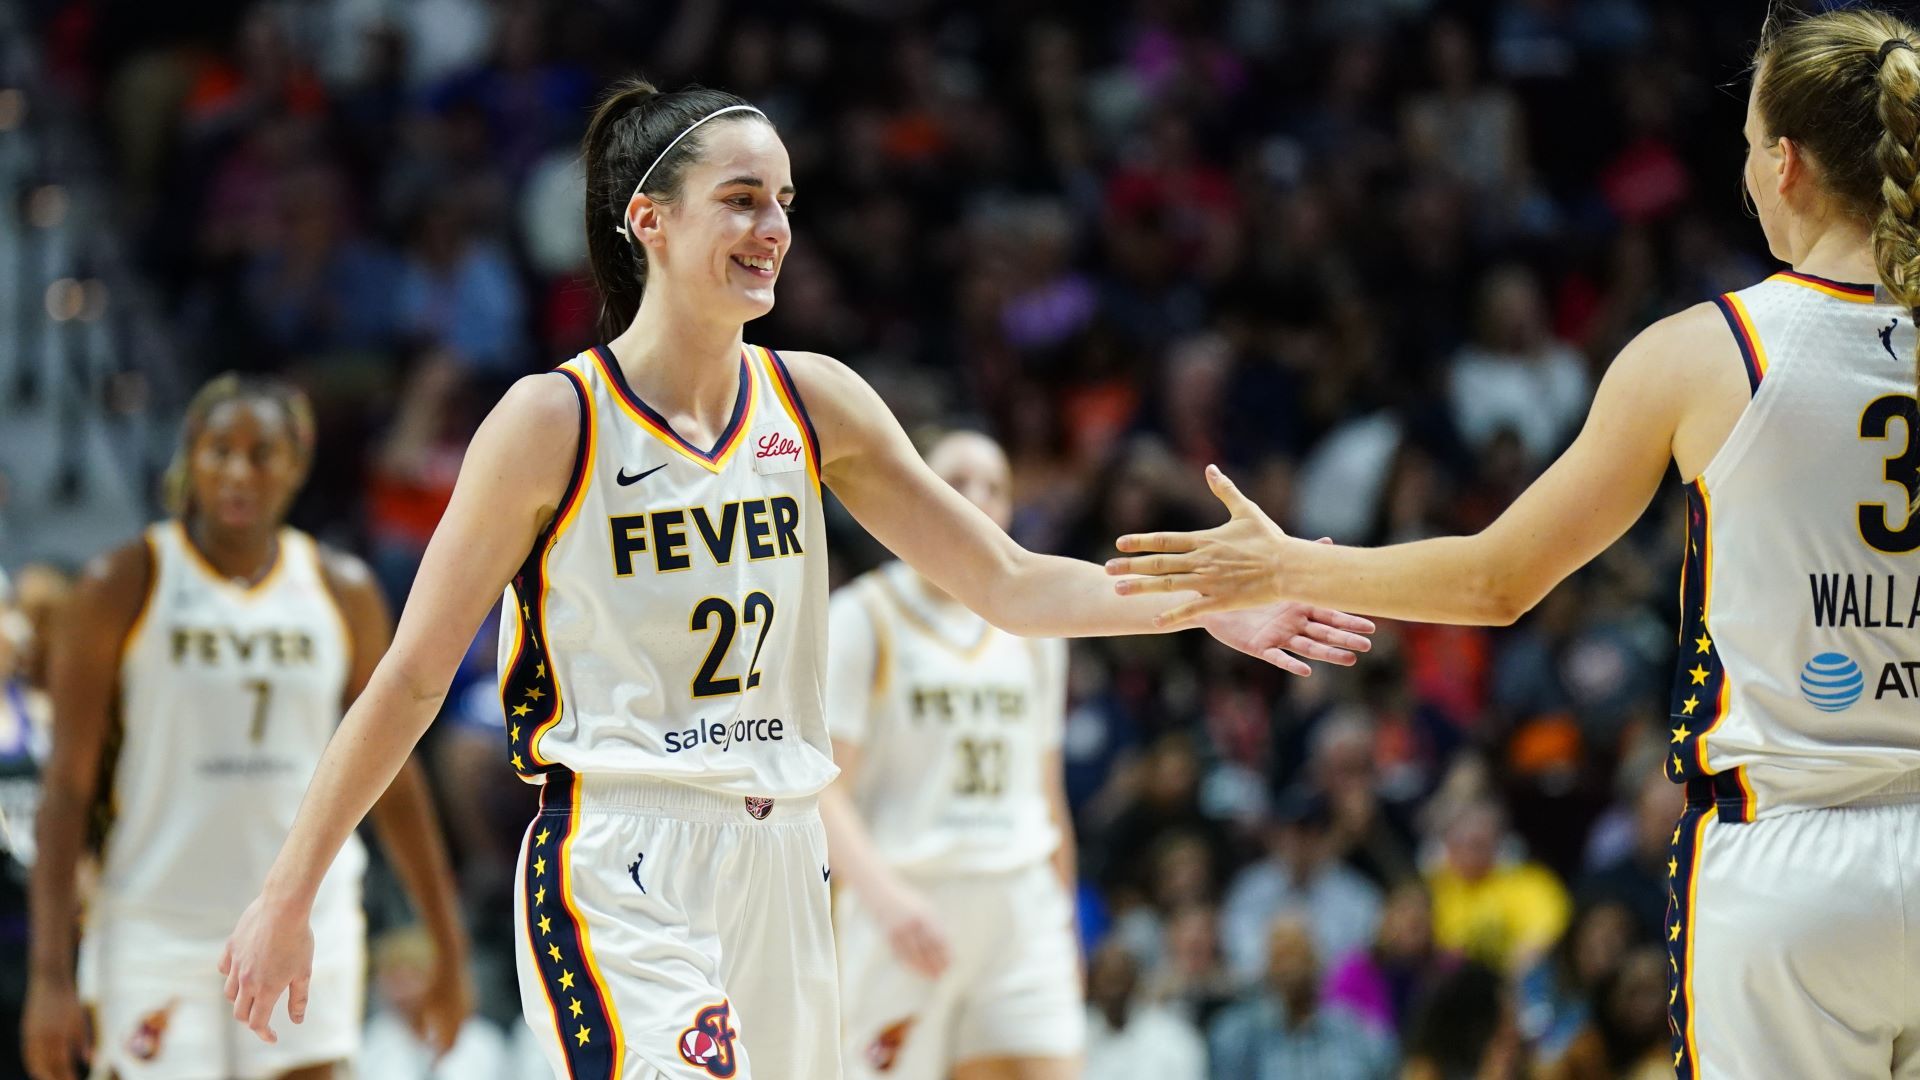 Caitlin Clark Reveals In-Game Message She Got From Fever Teammate In
WNBA Debut